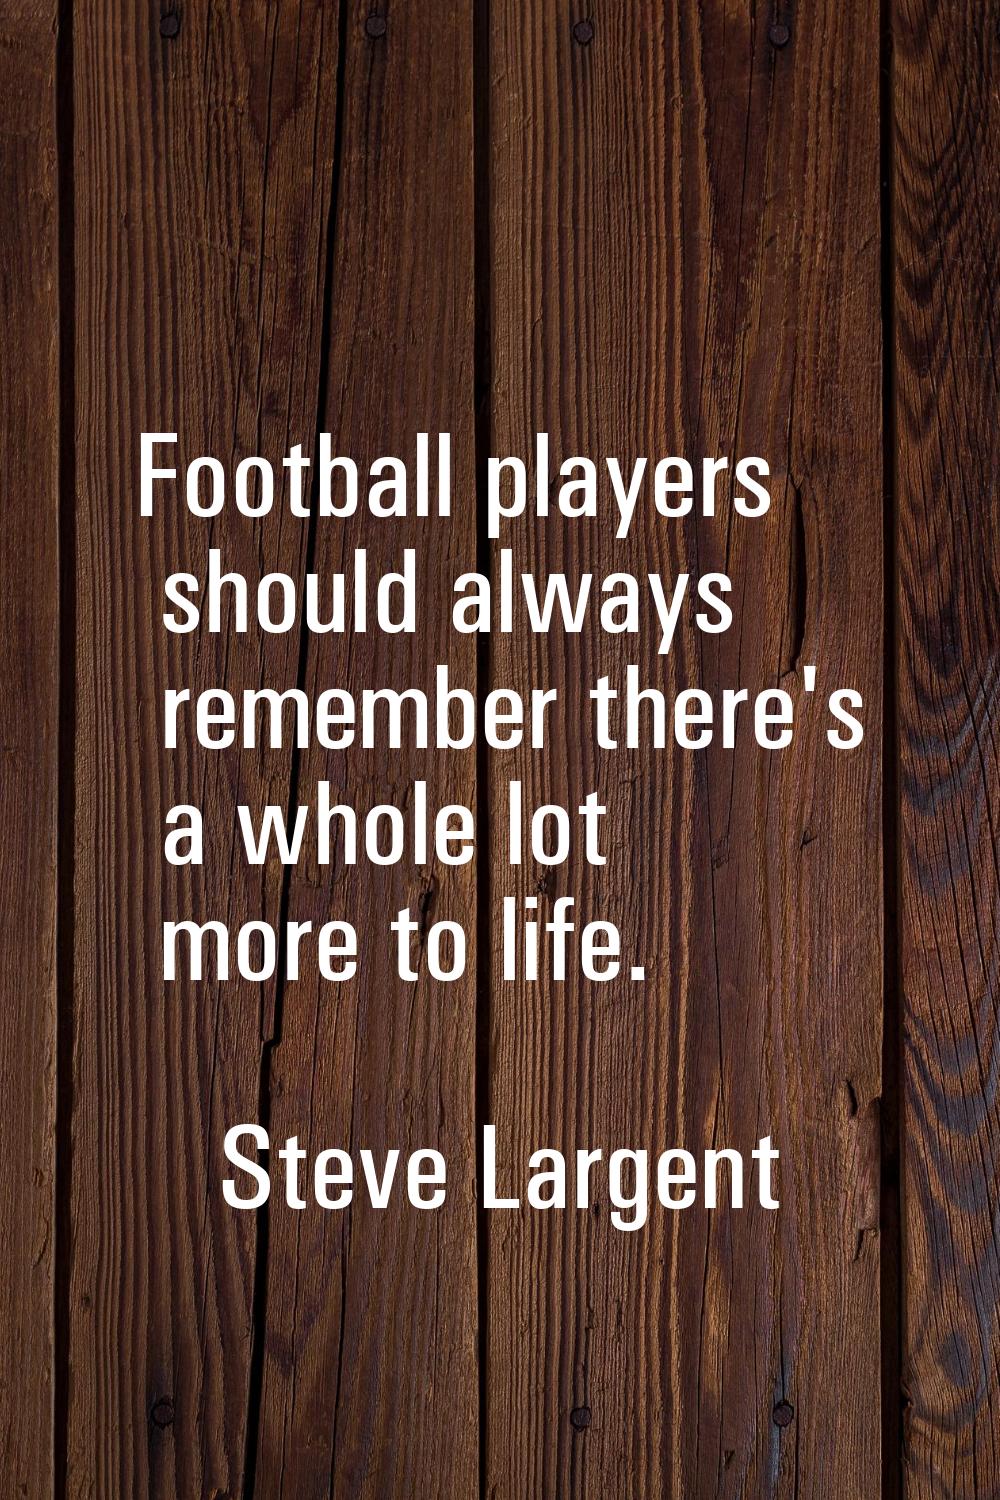 Football players should always remember there's a whole lot more to life.